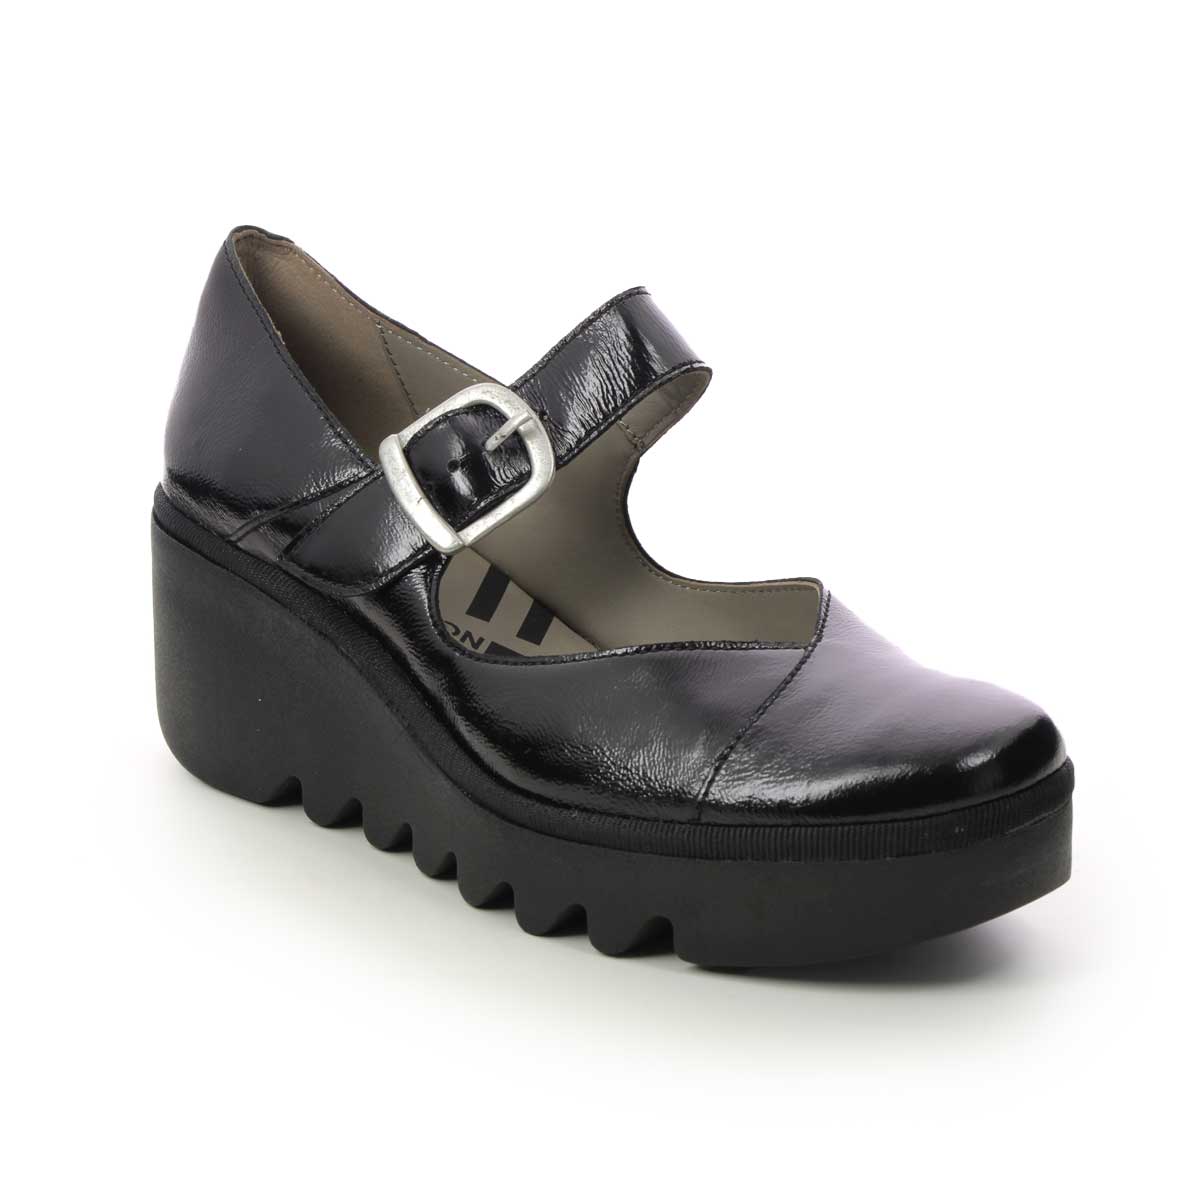 Fly London Baxe   Blu Lmj Black Patent Womens Wedge Shoes P501428 In Size 41 In Plain Black Patent